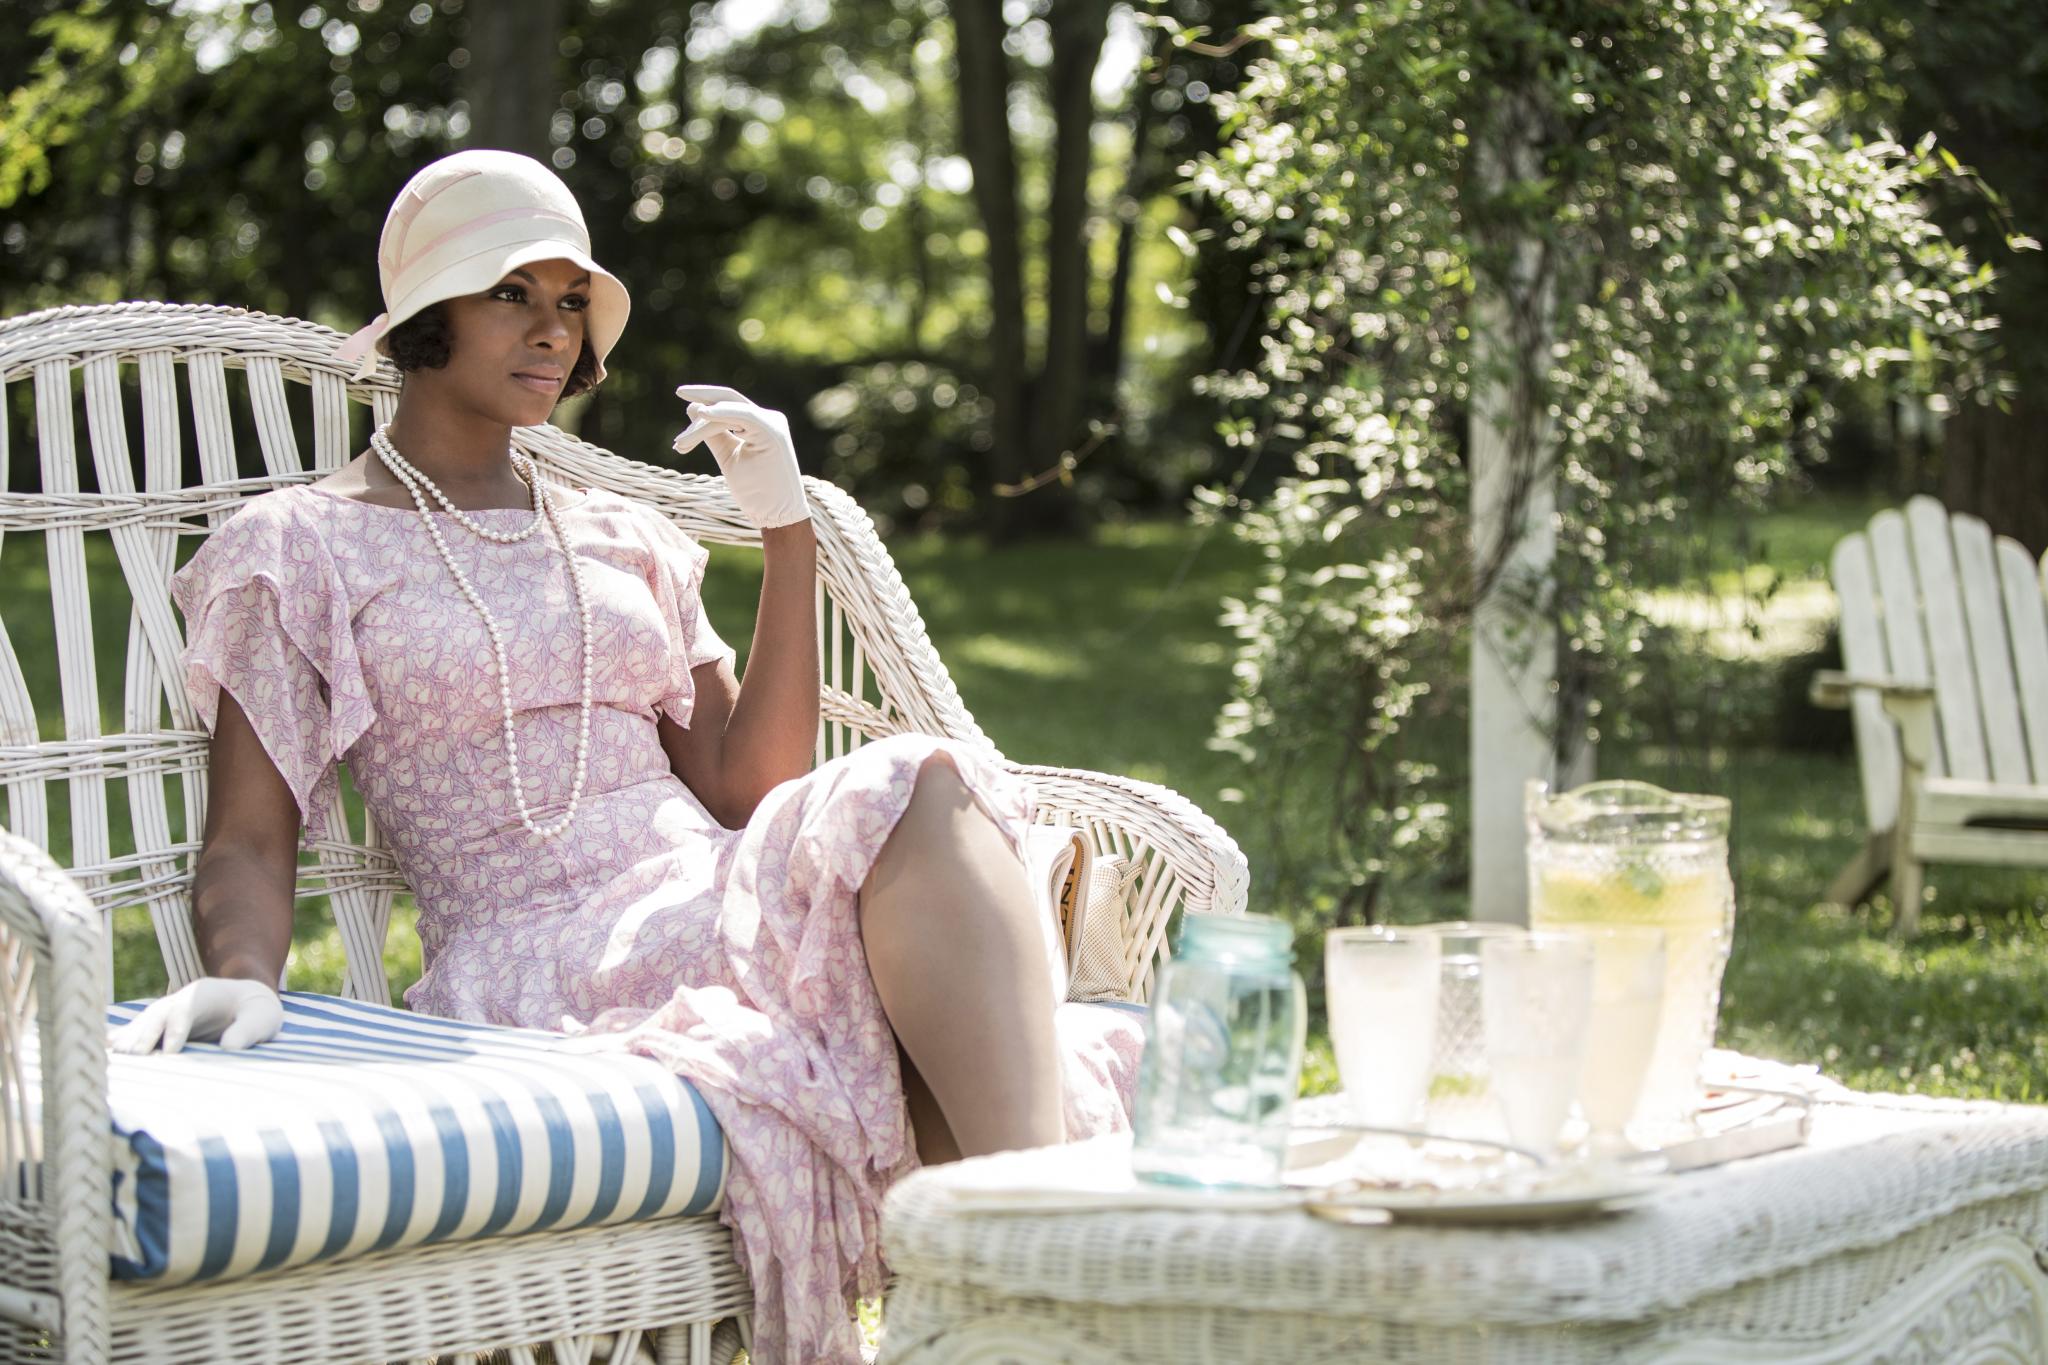 Tika Sumpter on Playing Queen Latifah’s Love Interest in ‘Bessie,’ Preparing to Play Michelle Obama